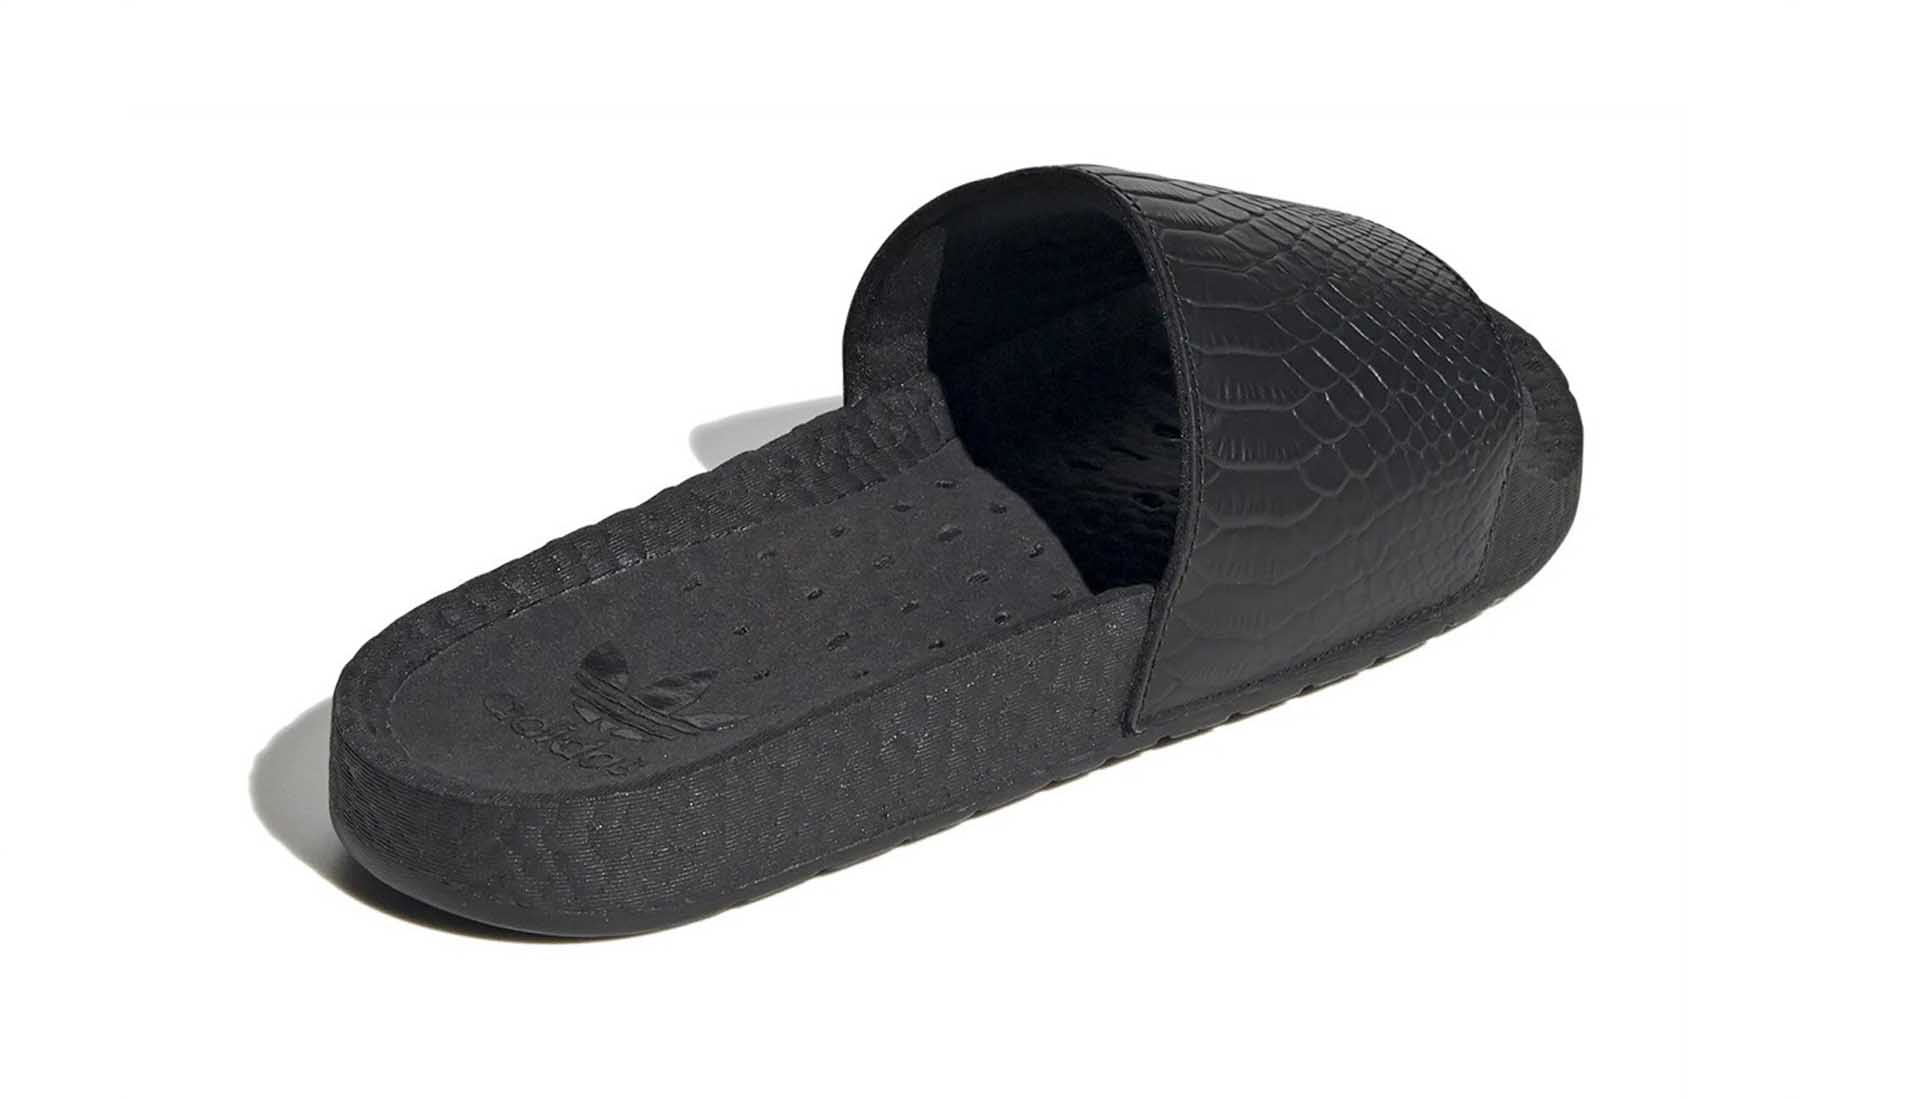 adidas boost slides release